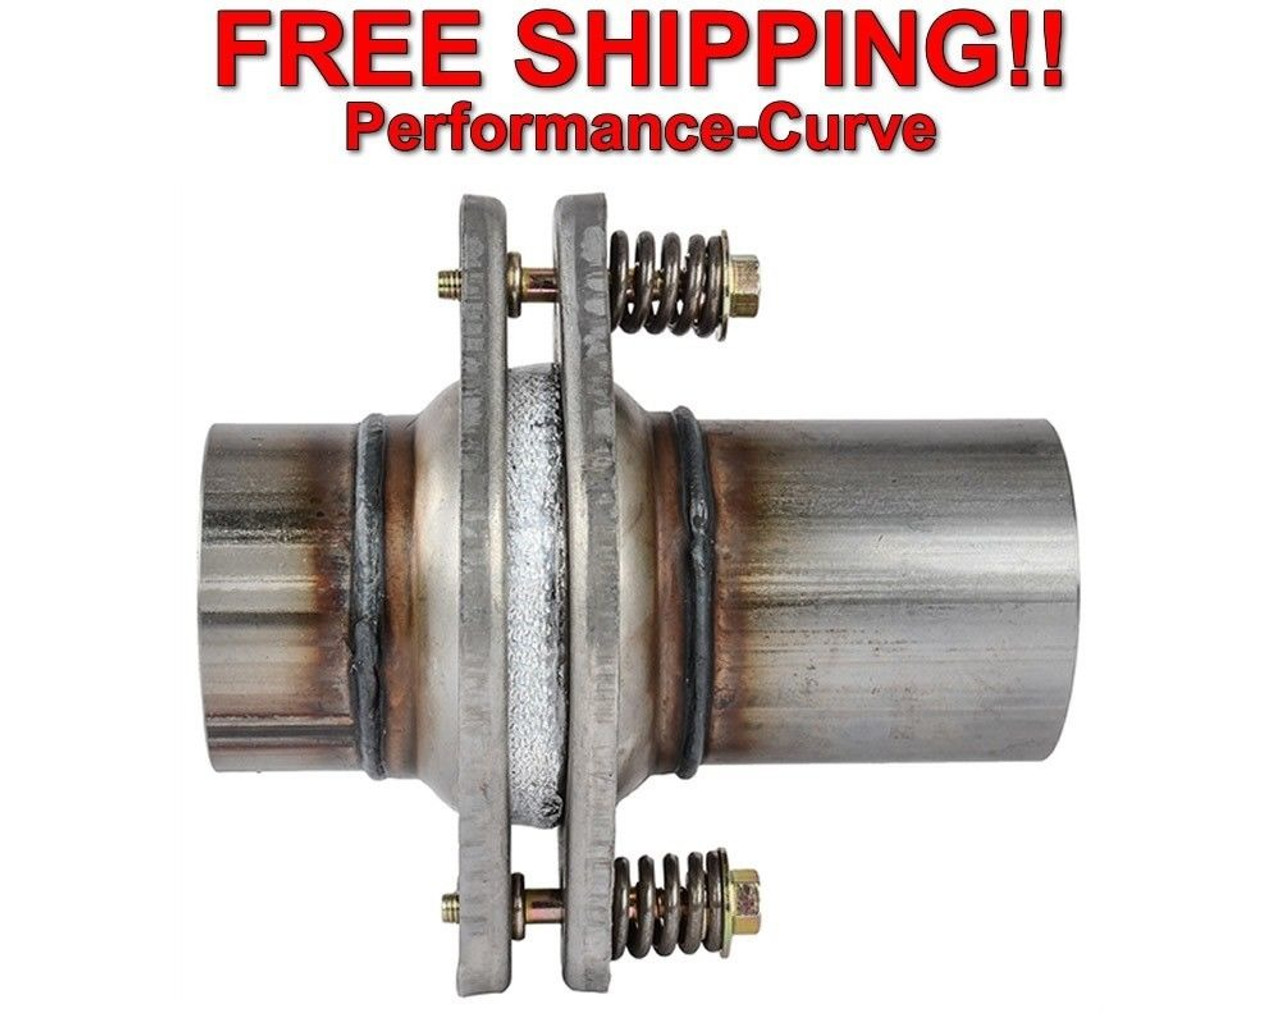 2.25 Exhaust Spherical Joint - Repair Flange - Universal Spring Bolt Kit -  Performance-Curve